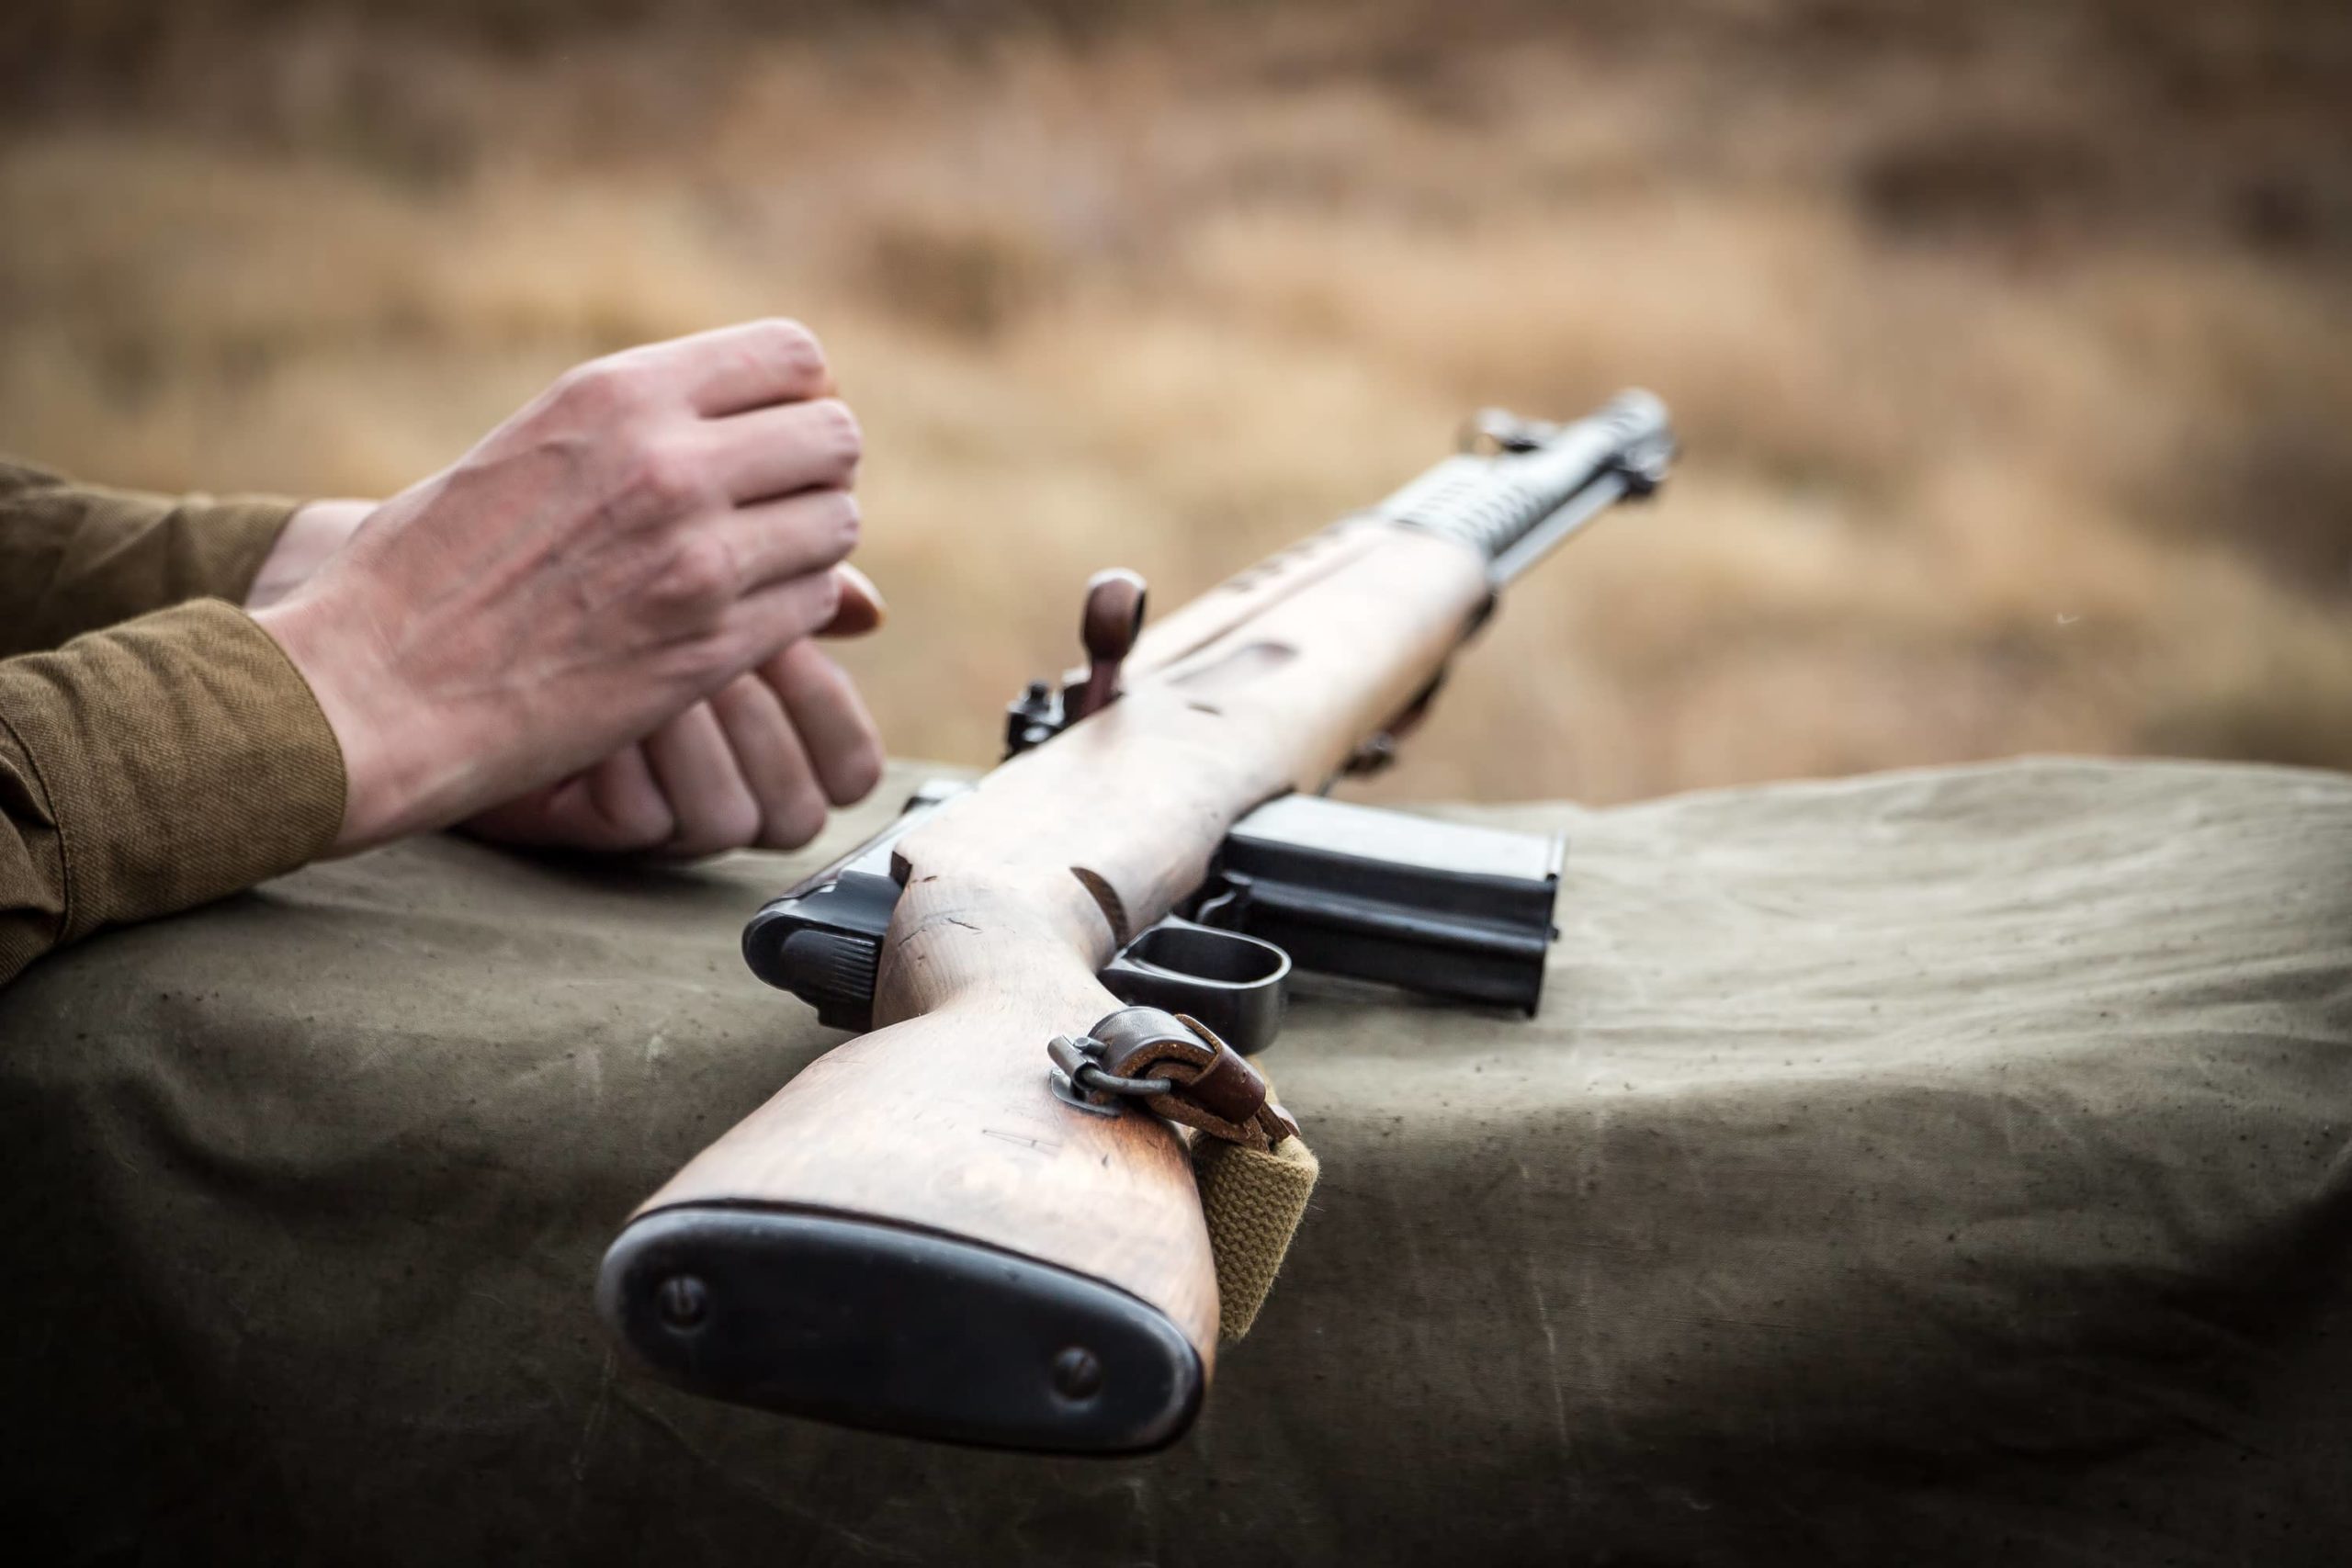 Hunter Sues Gun Maker After Rifle Explodes and Severely Injures Him